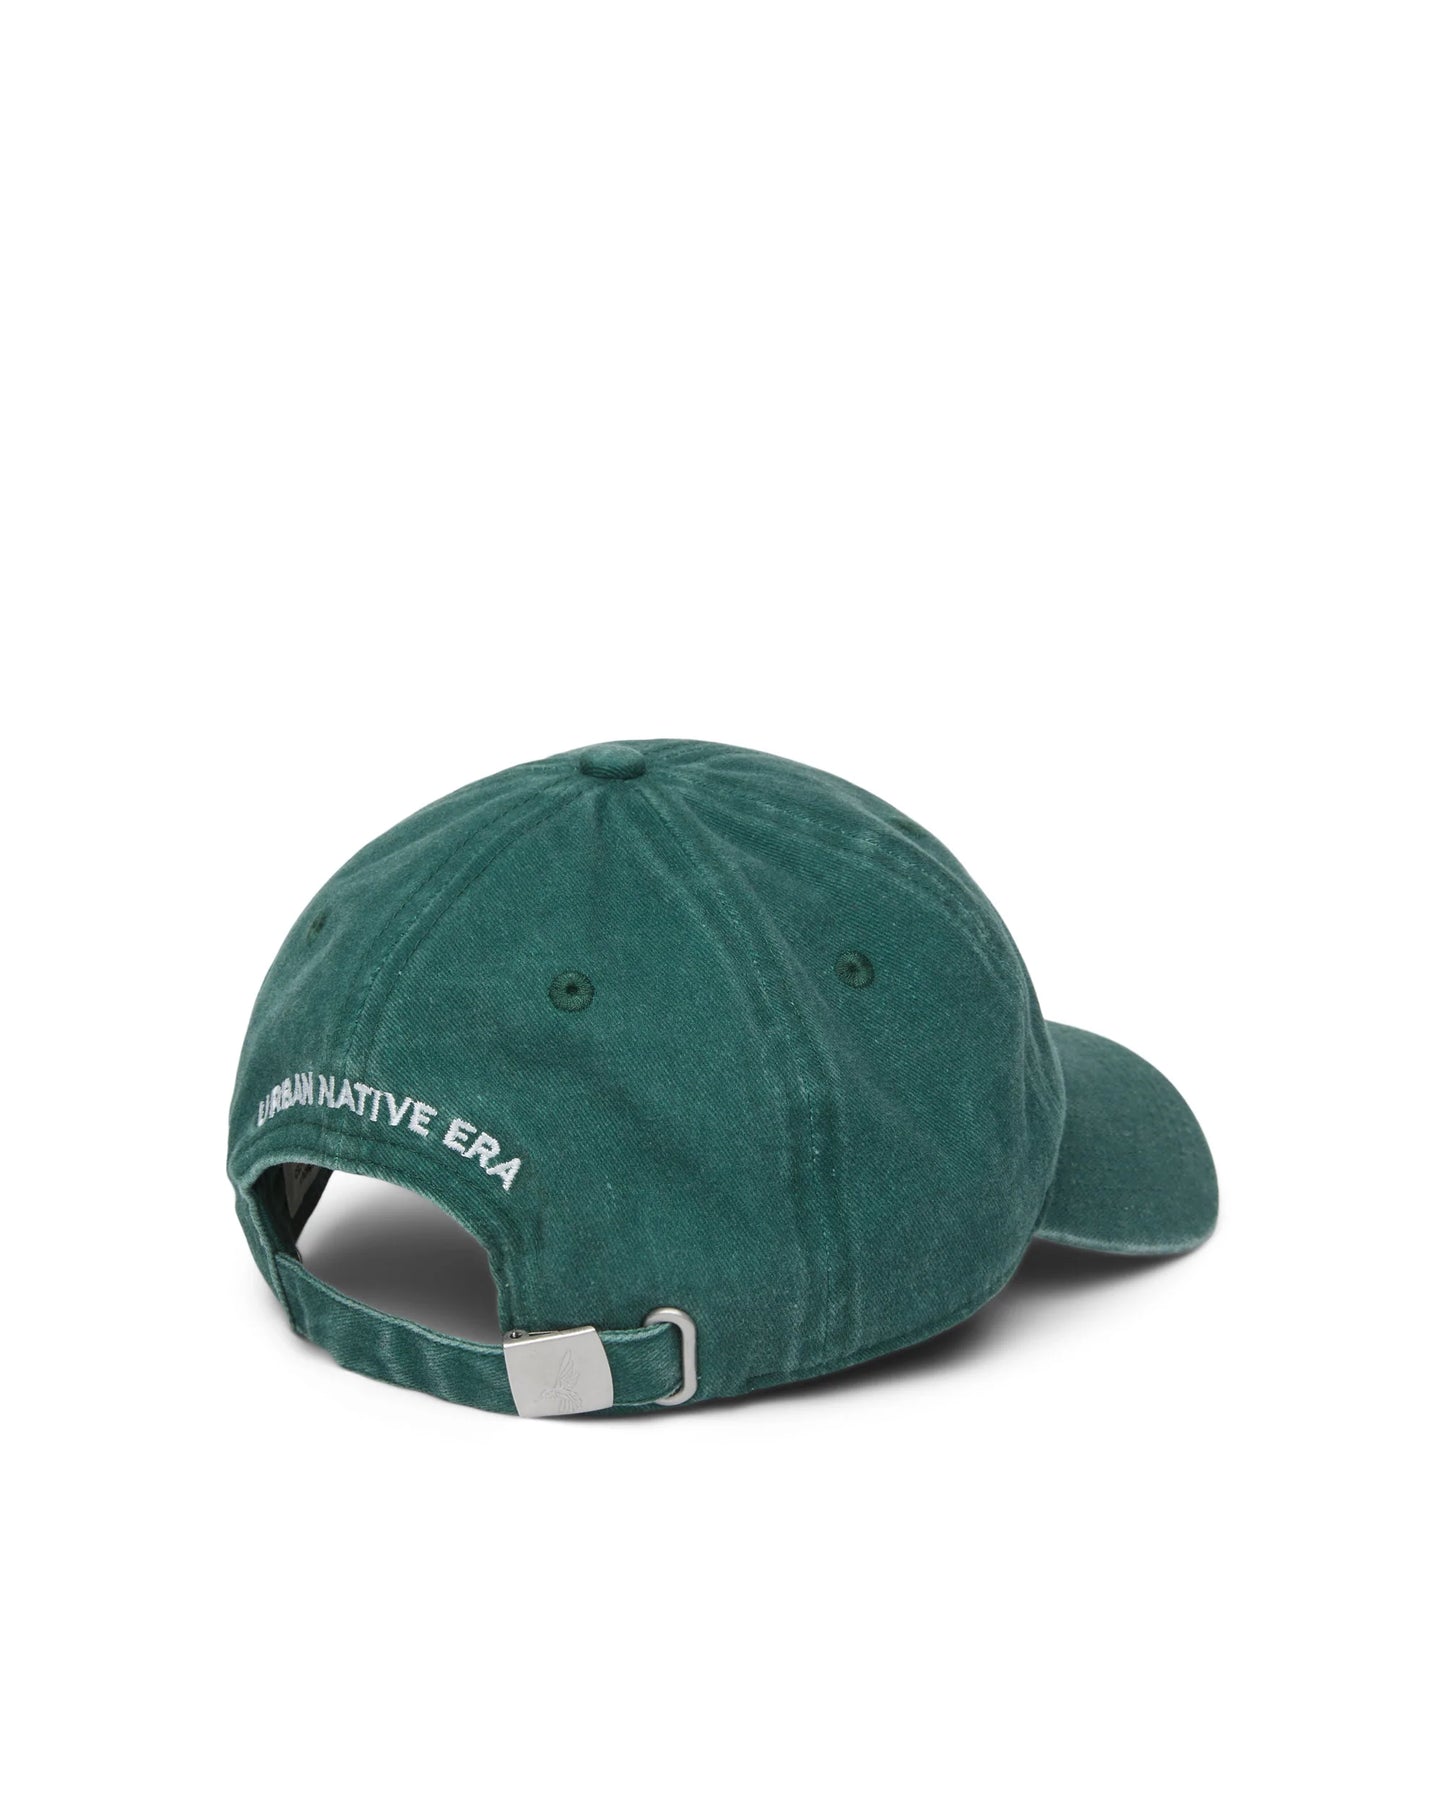 'YOU ARE ON NATIVE LAND' DAD CAP Forest Green